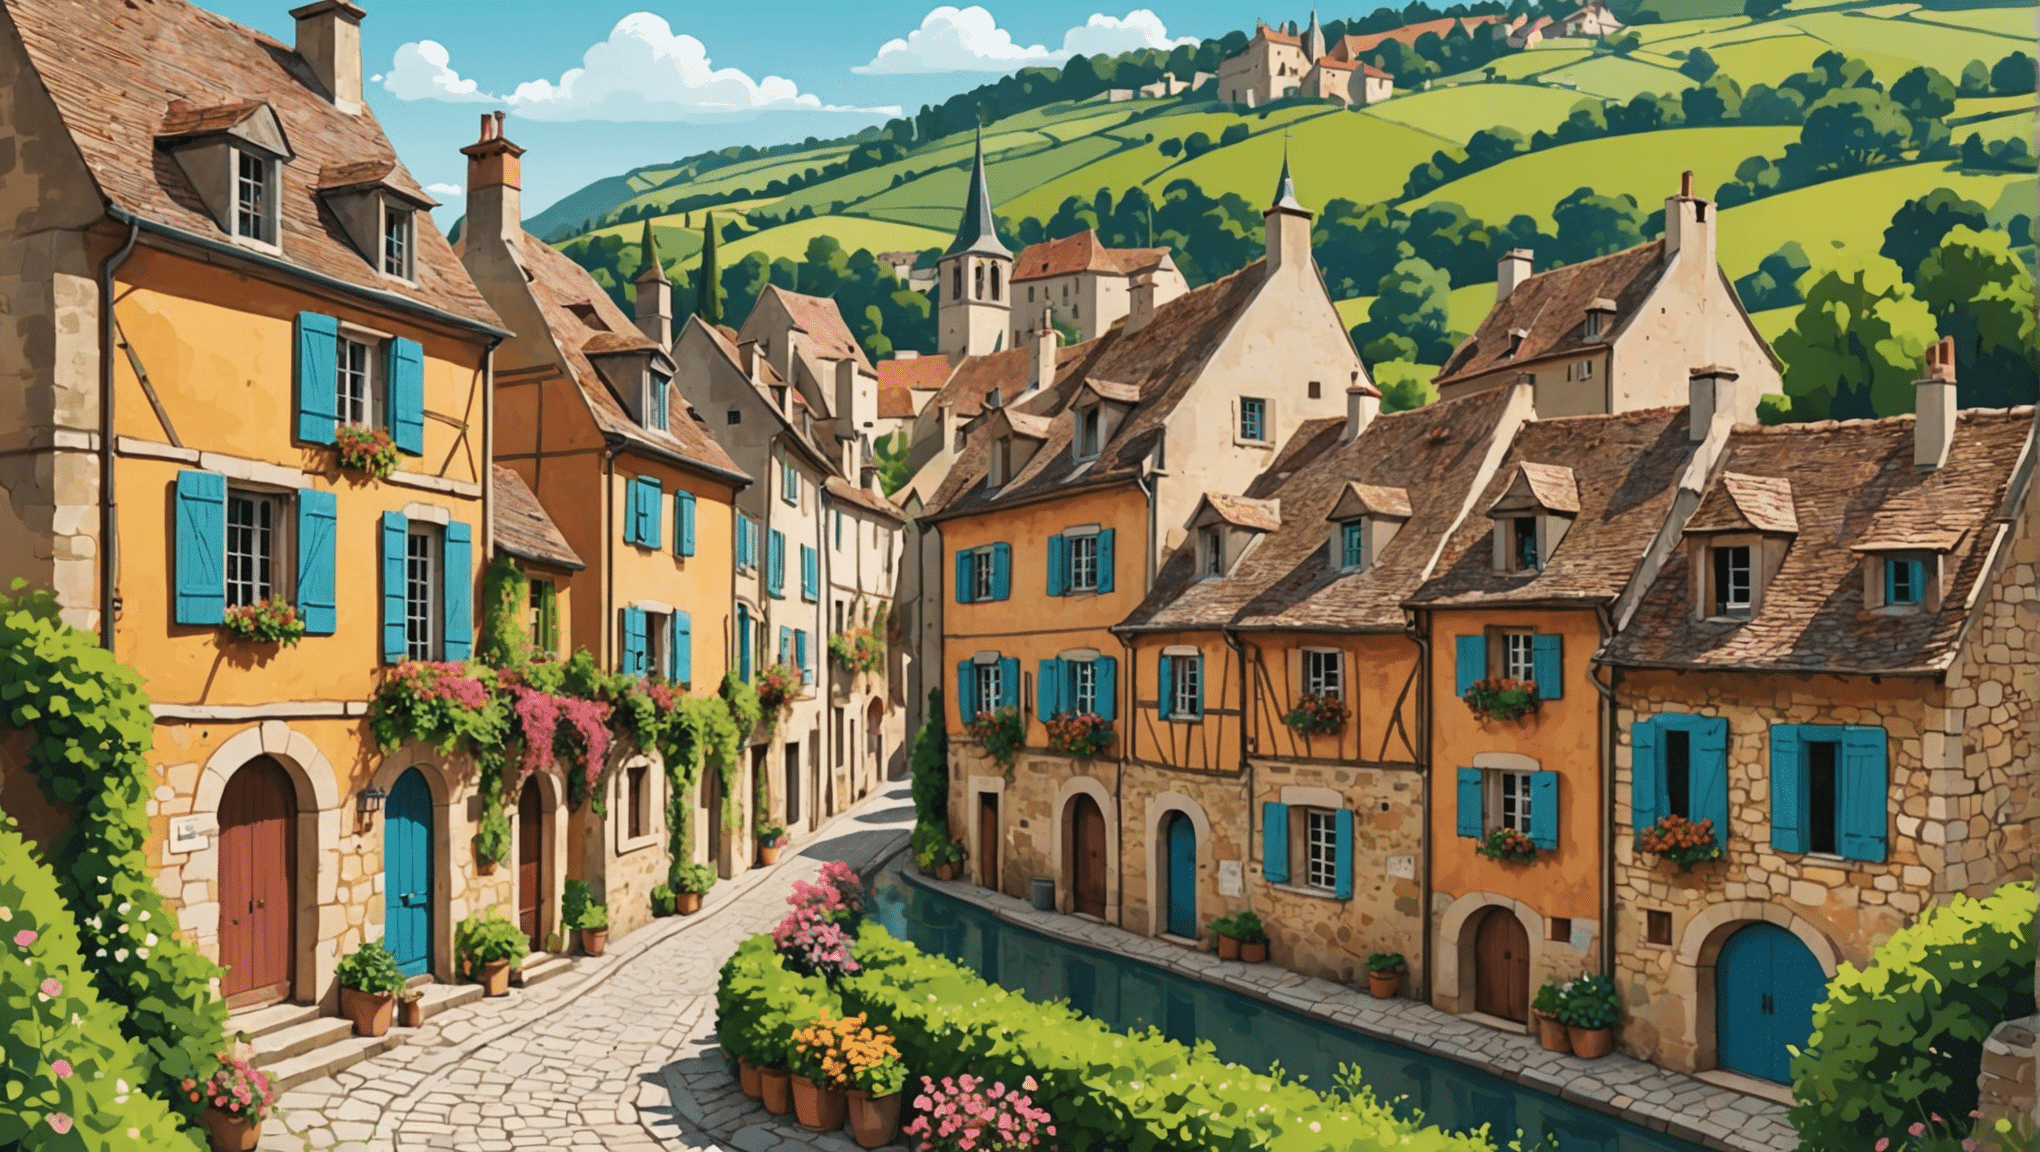 discover the most beautiful villages in France through our essential selection. treasures to absolutely visit for an authentic and picturesque getaway.